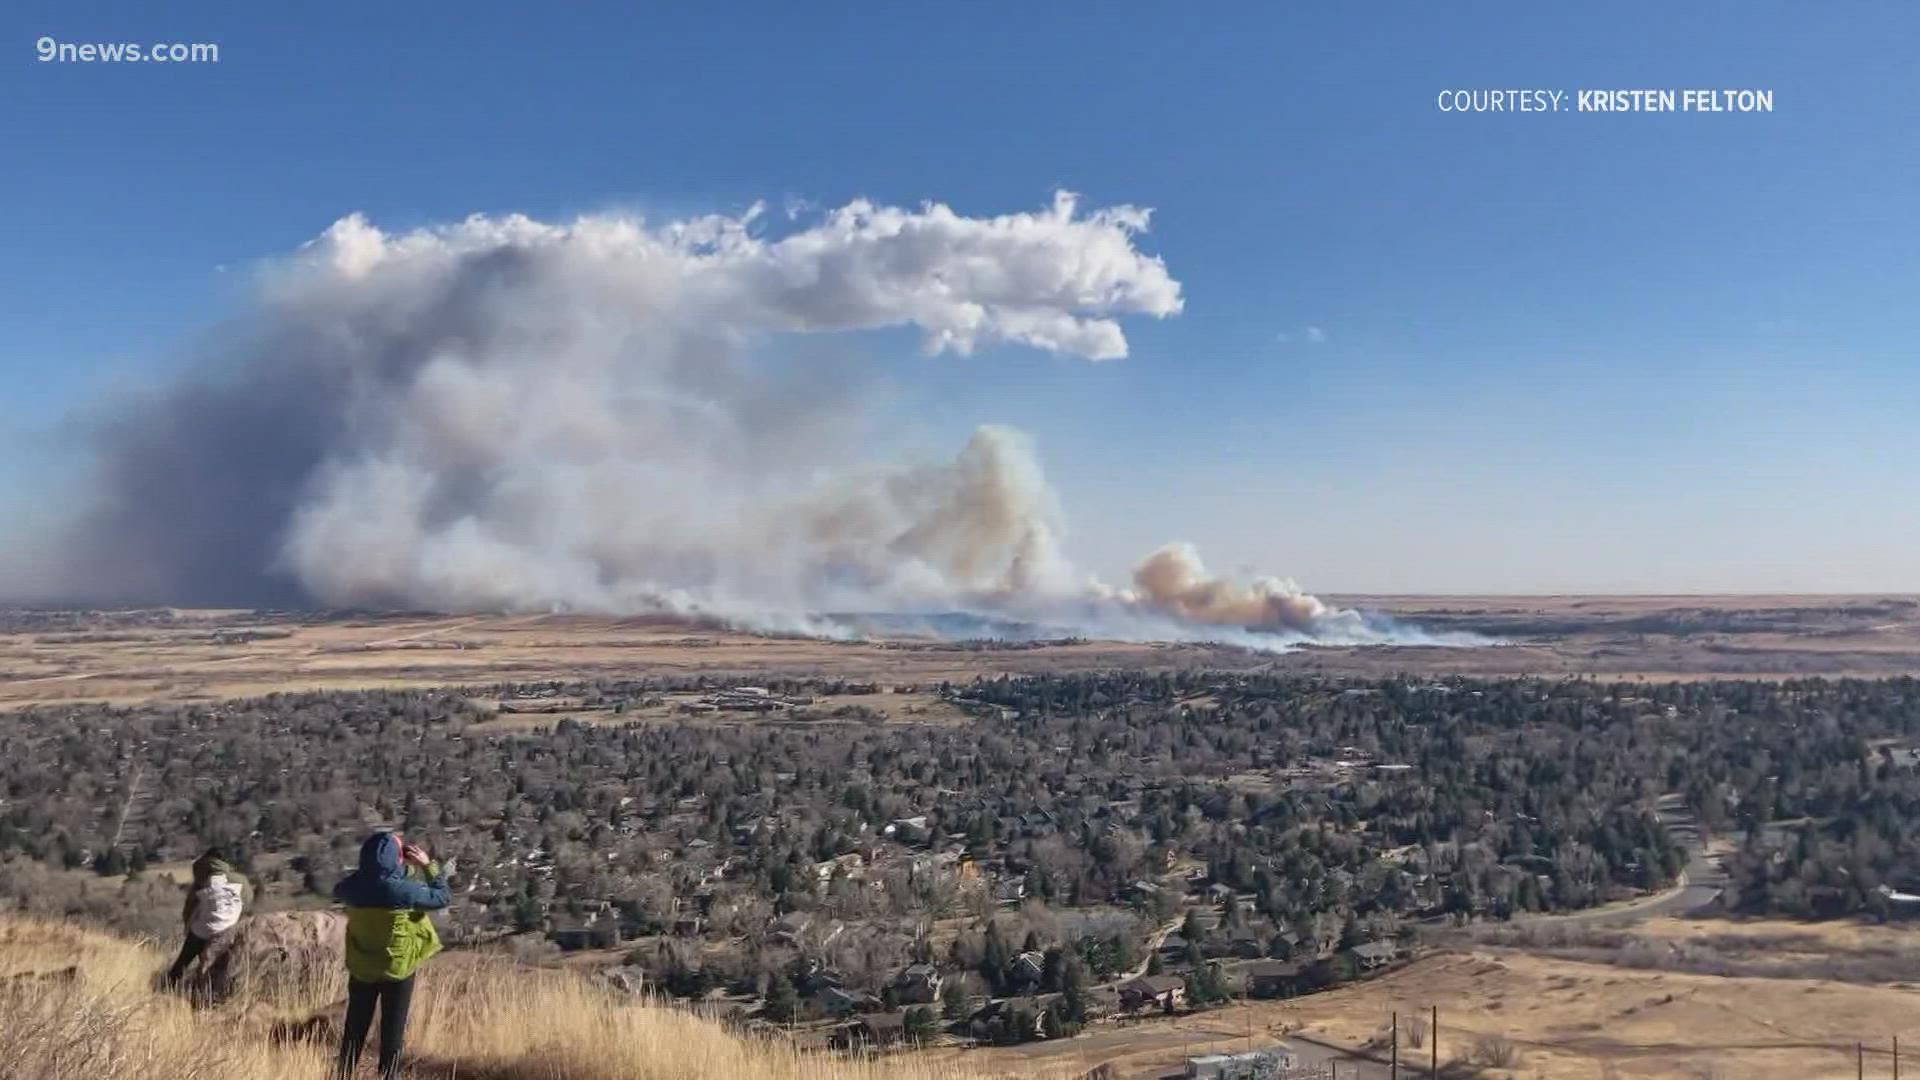 9NEWS Meteorologists Cory Reppenhagen explains the science that caused the Marshall Fire in Boulder County to spread so quickly and violently.